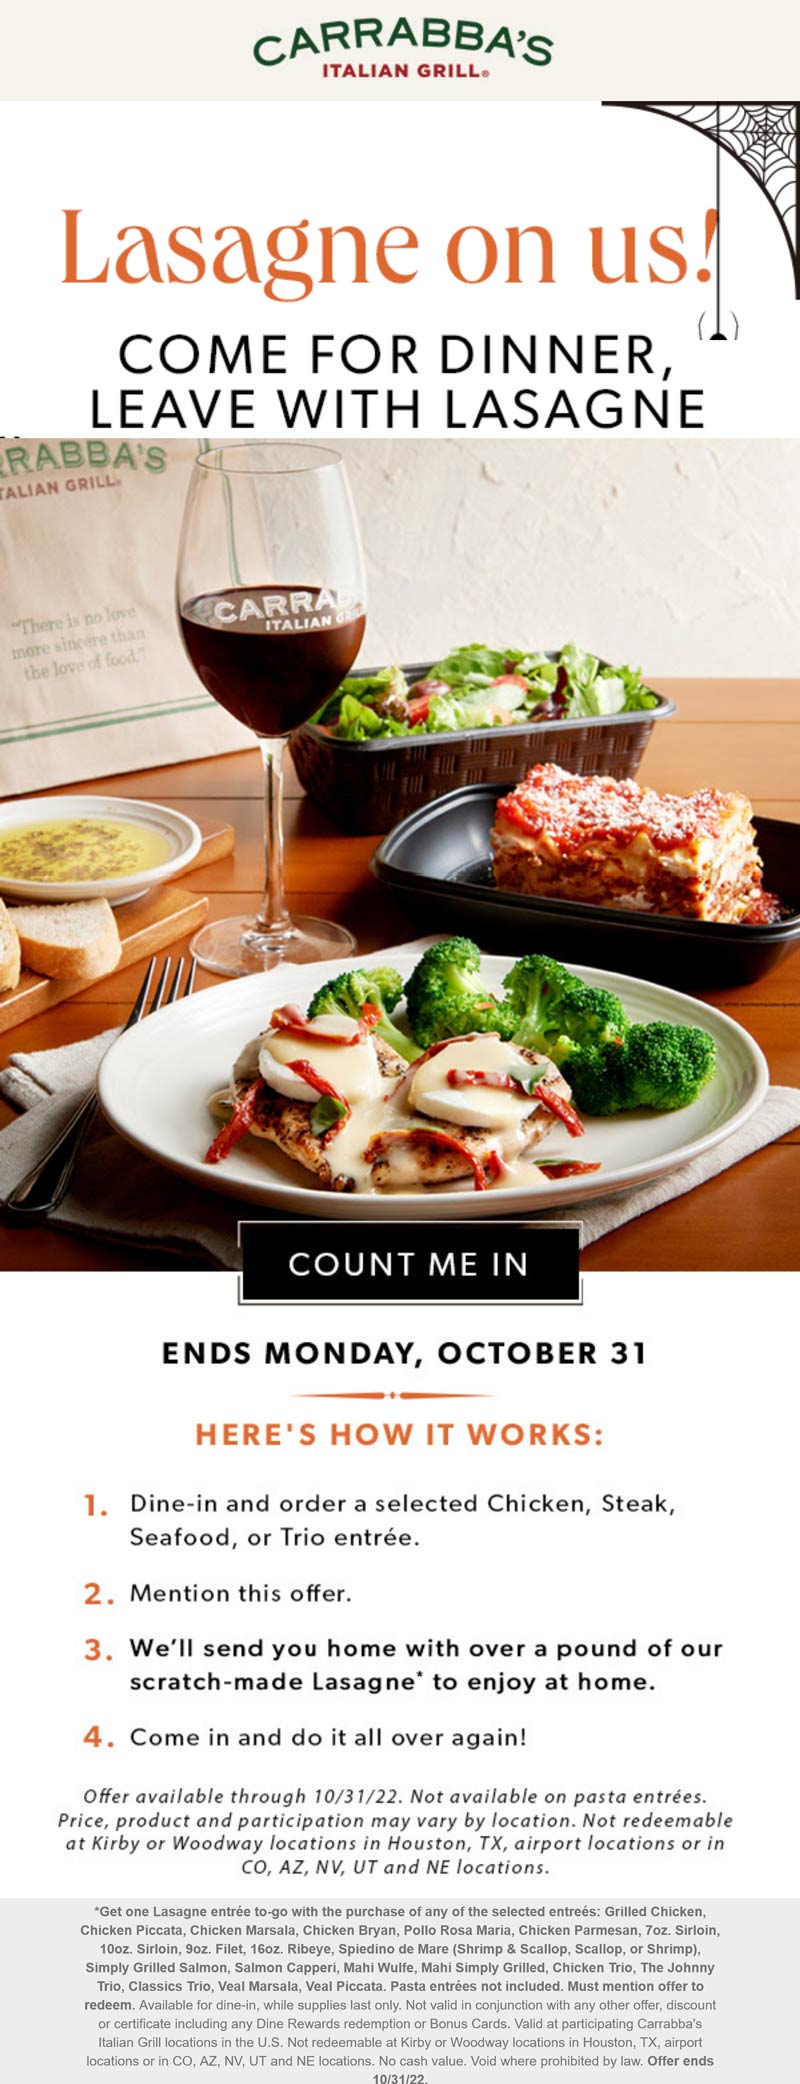 Free pound of lasagne as takeout with your dinein entree at Carrabbas